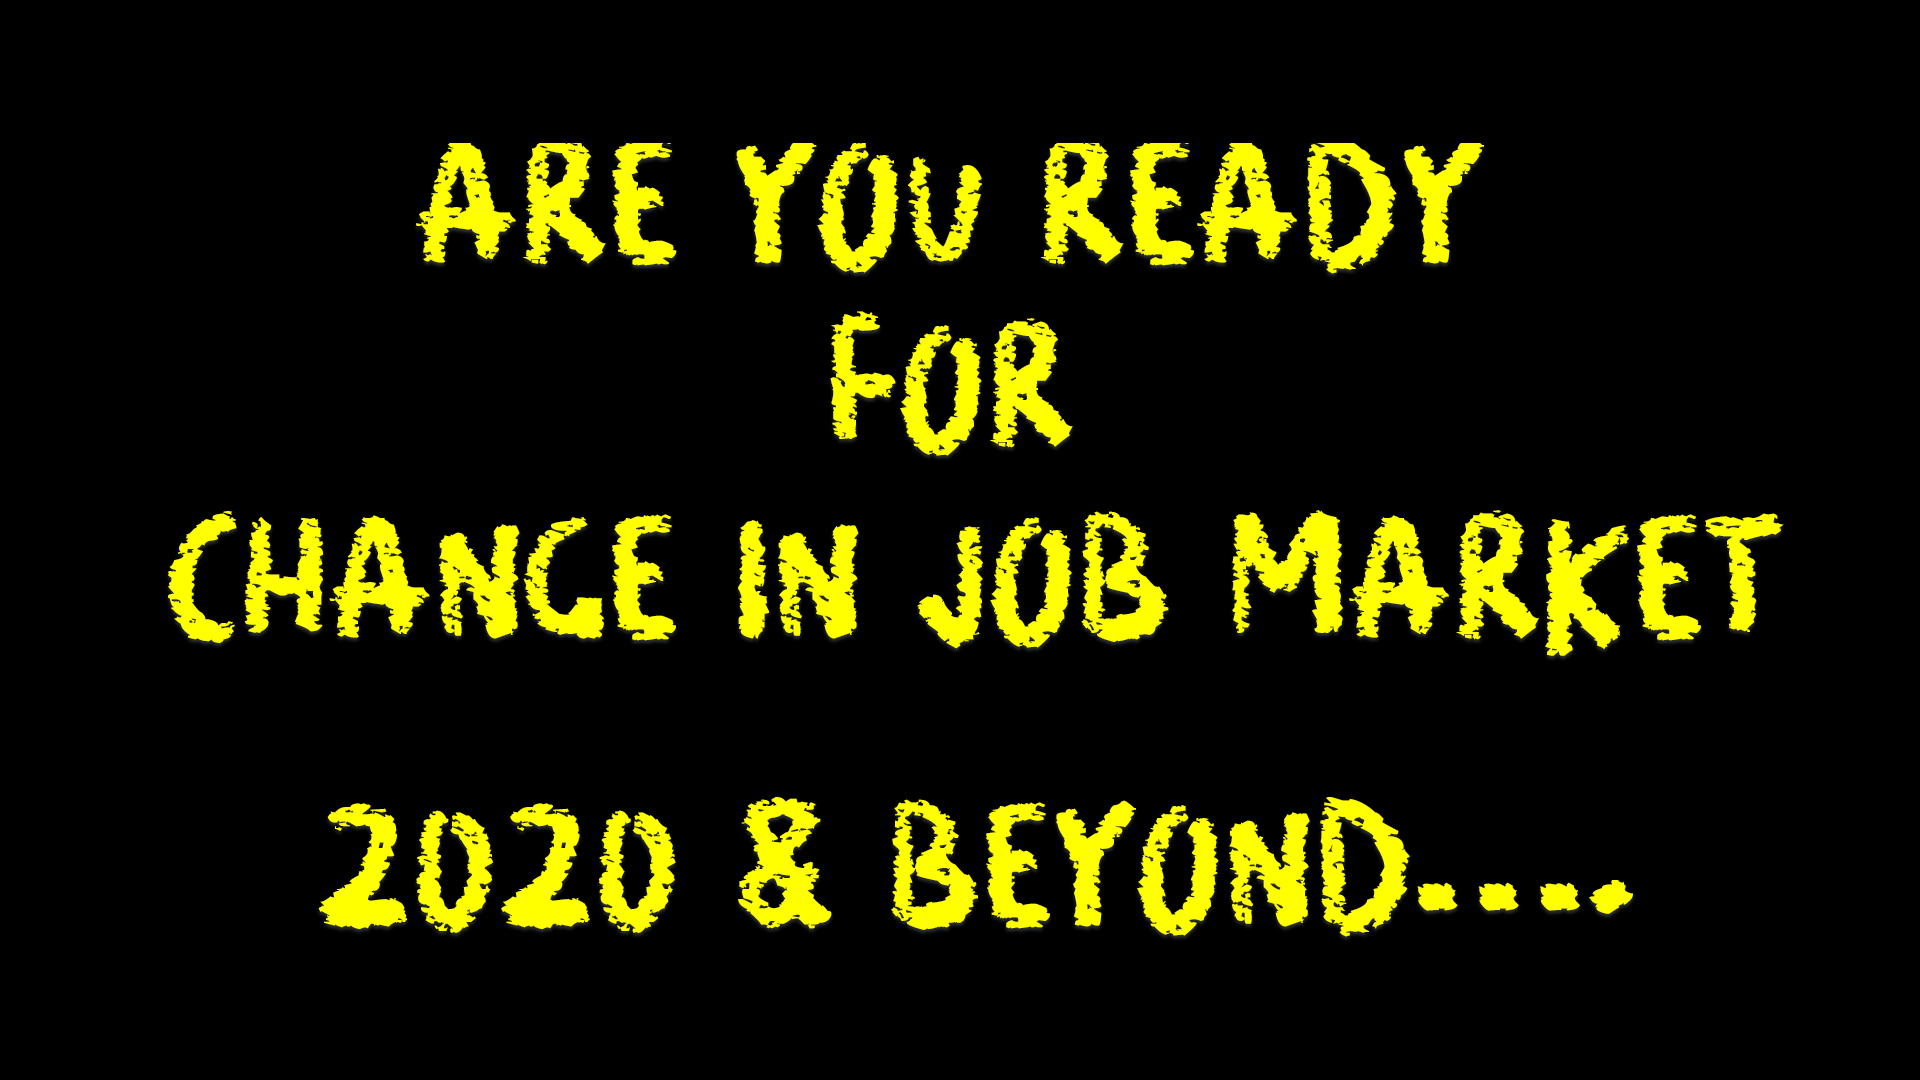 Are you ready for Change in Job Market 2020 & Beyond